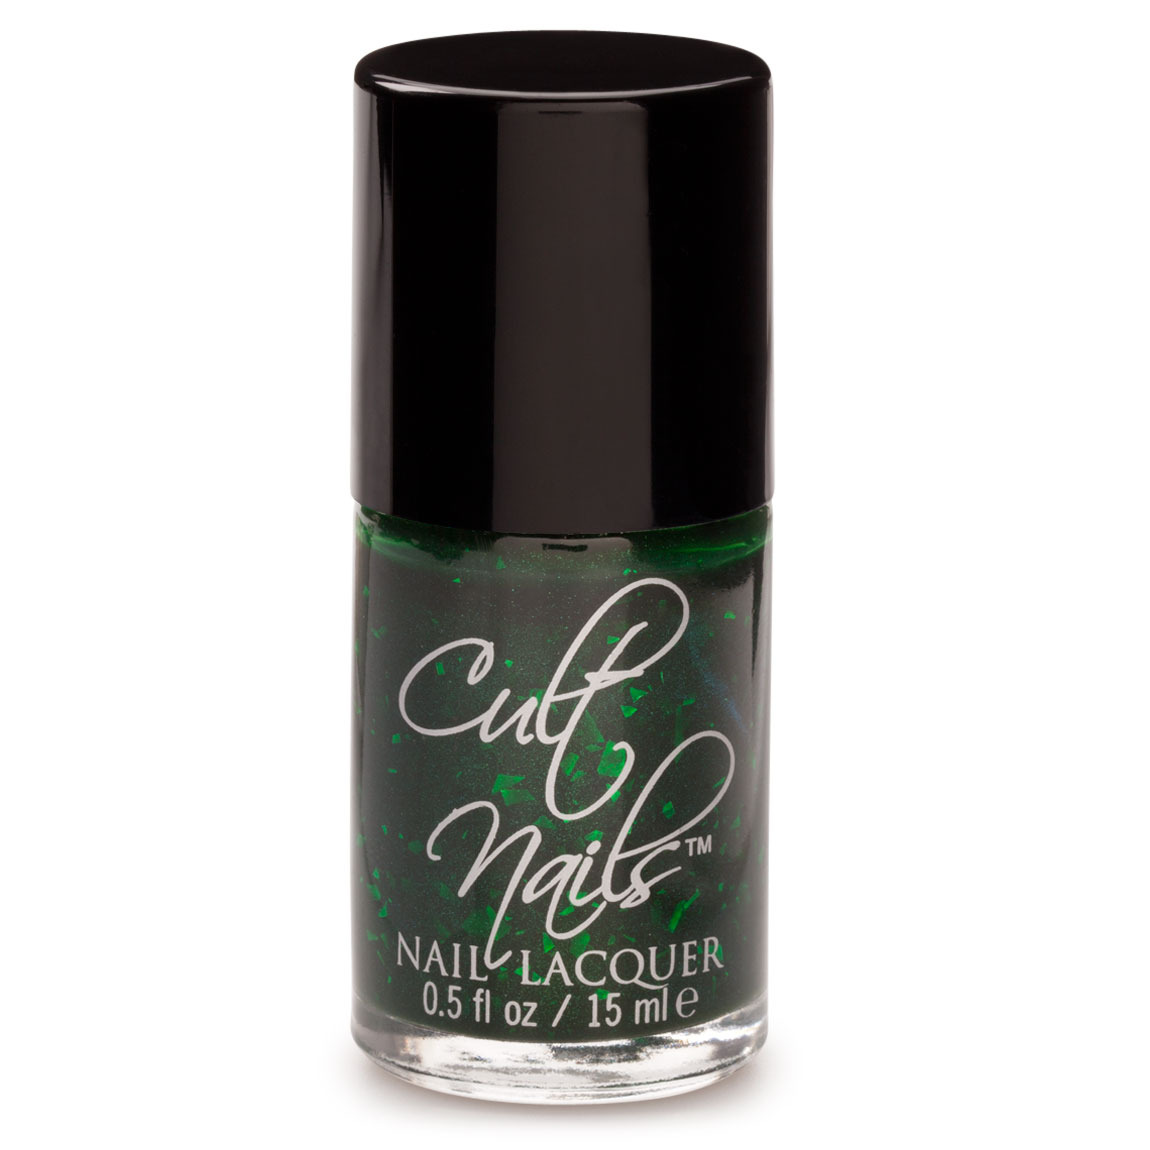 Cult Nails Nail Lacquer in Coveted